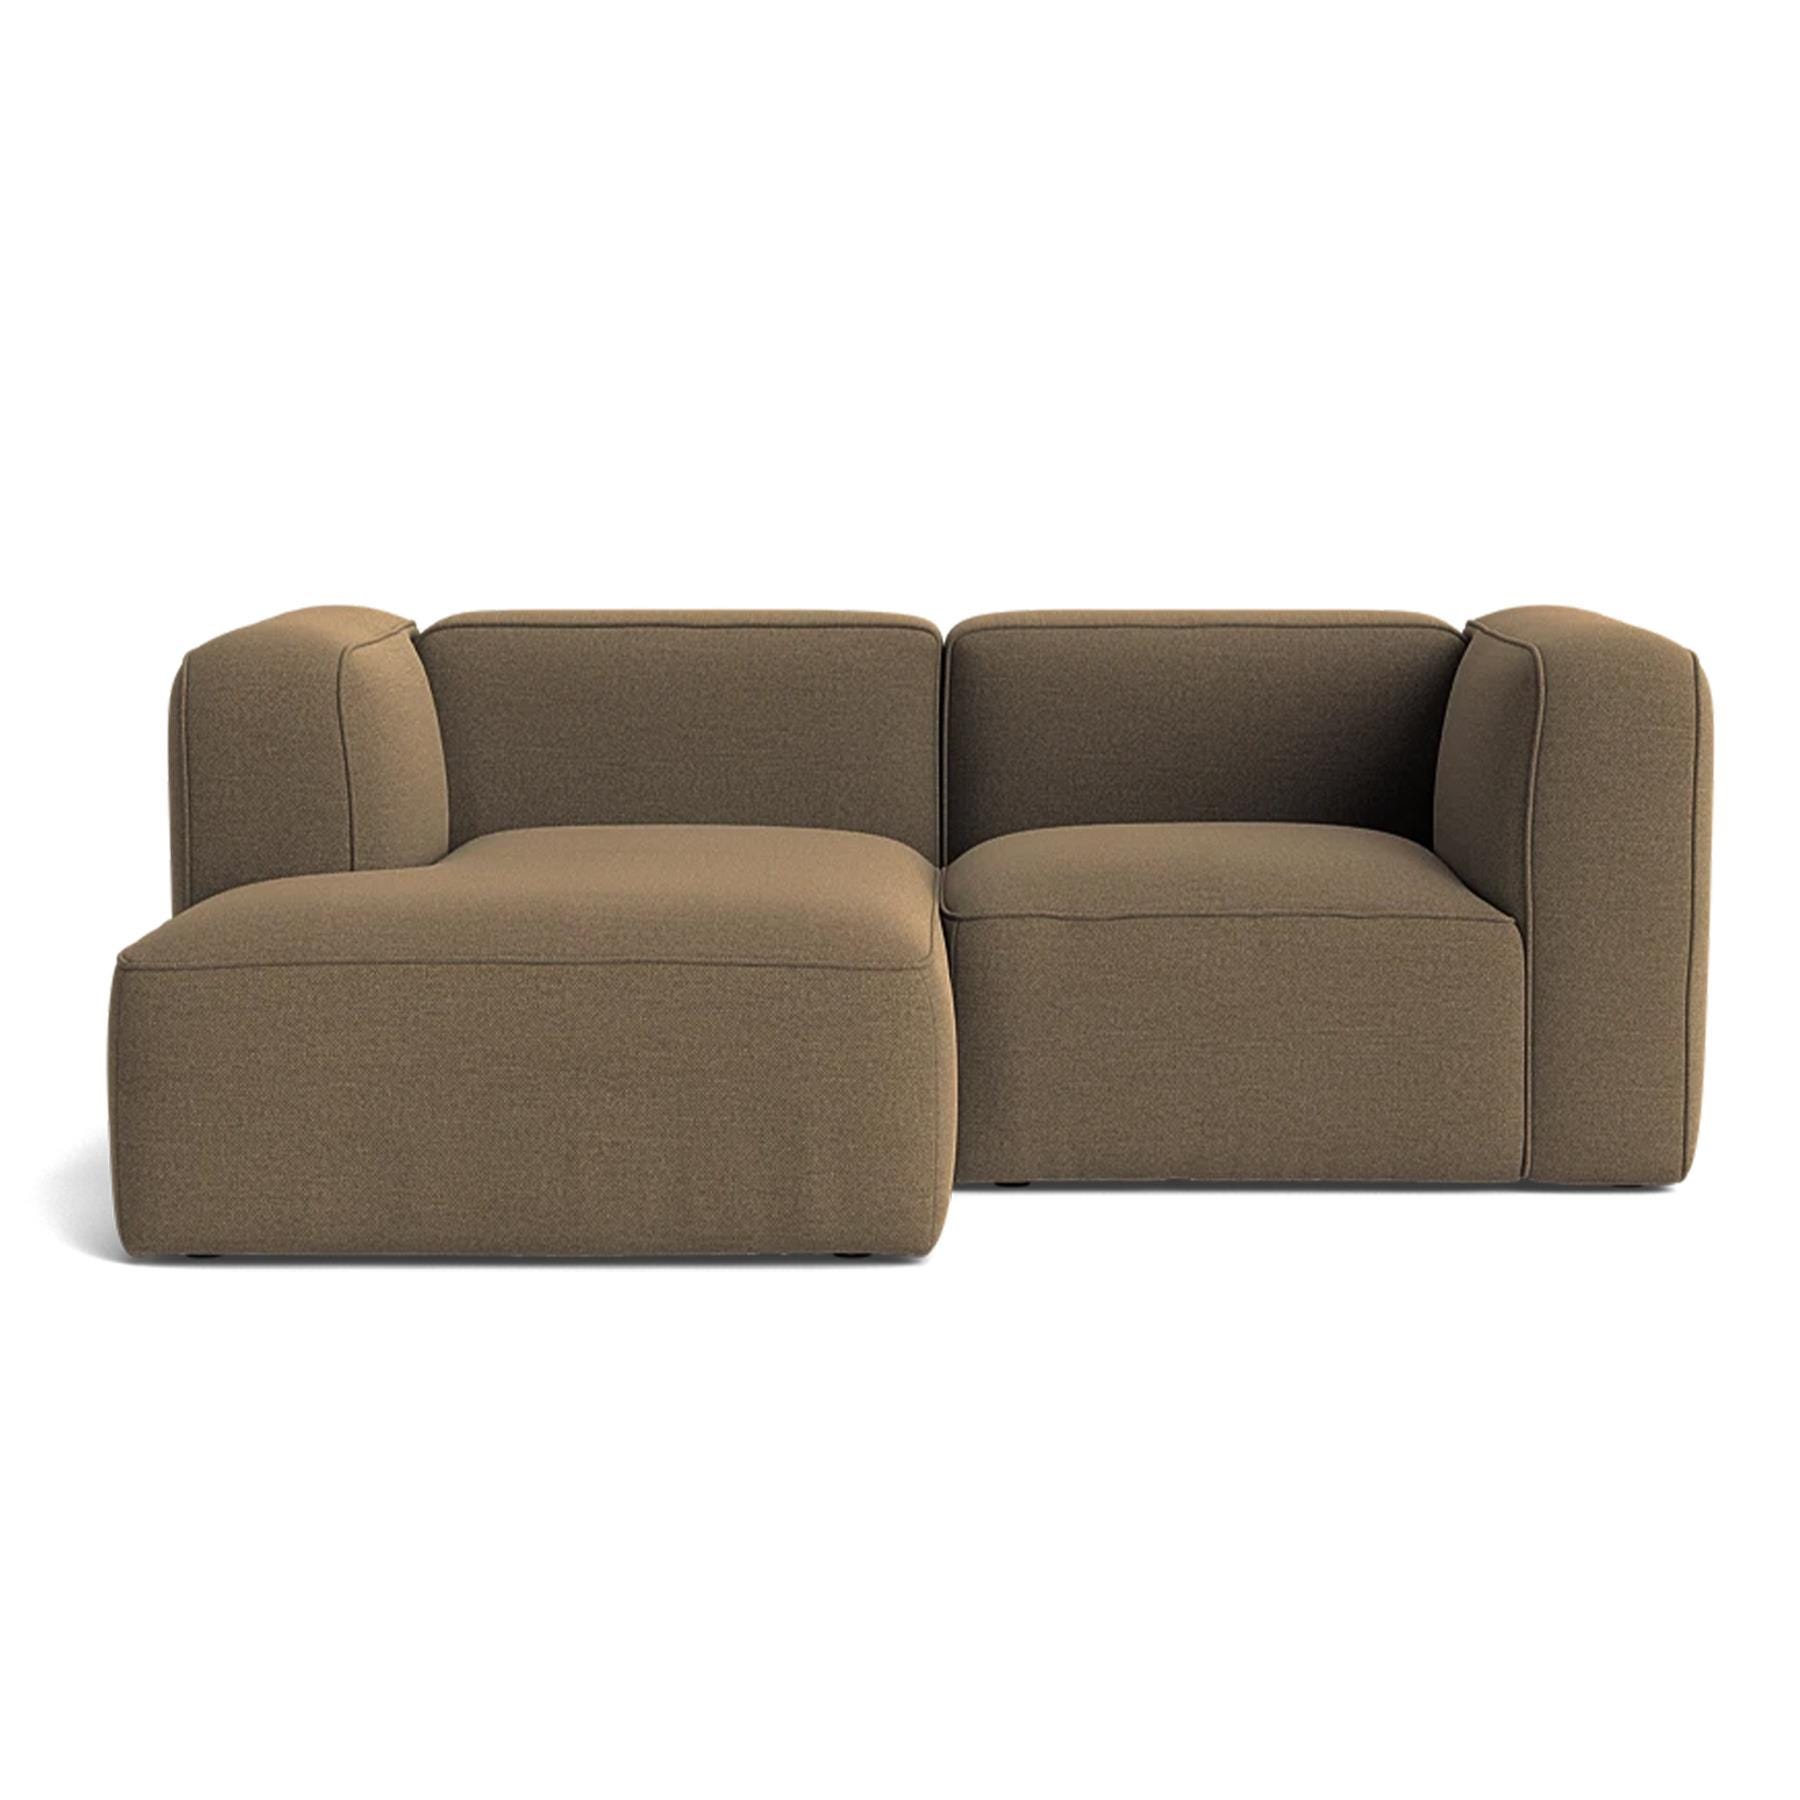 Make Nordic Basecamp Small Sofa Rewool 358 Left Brown Designer Furniture From Holloways Of Ludlow